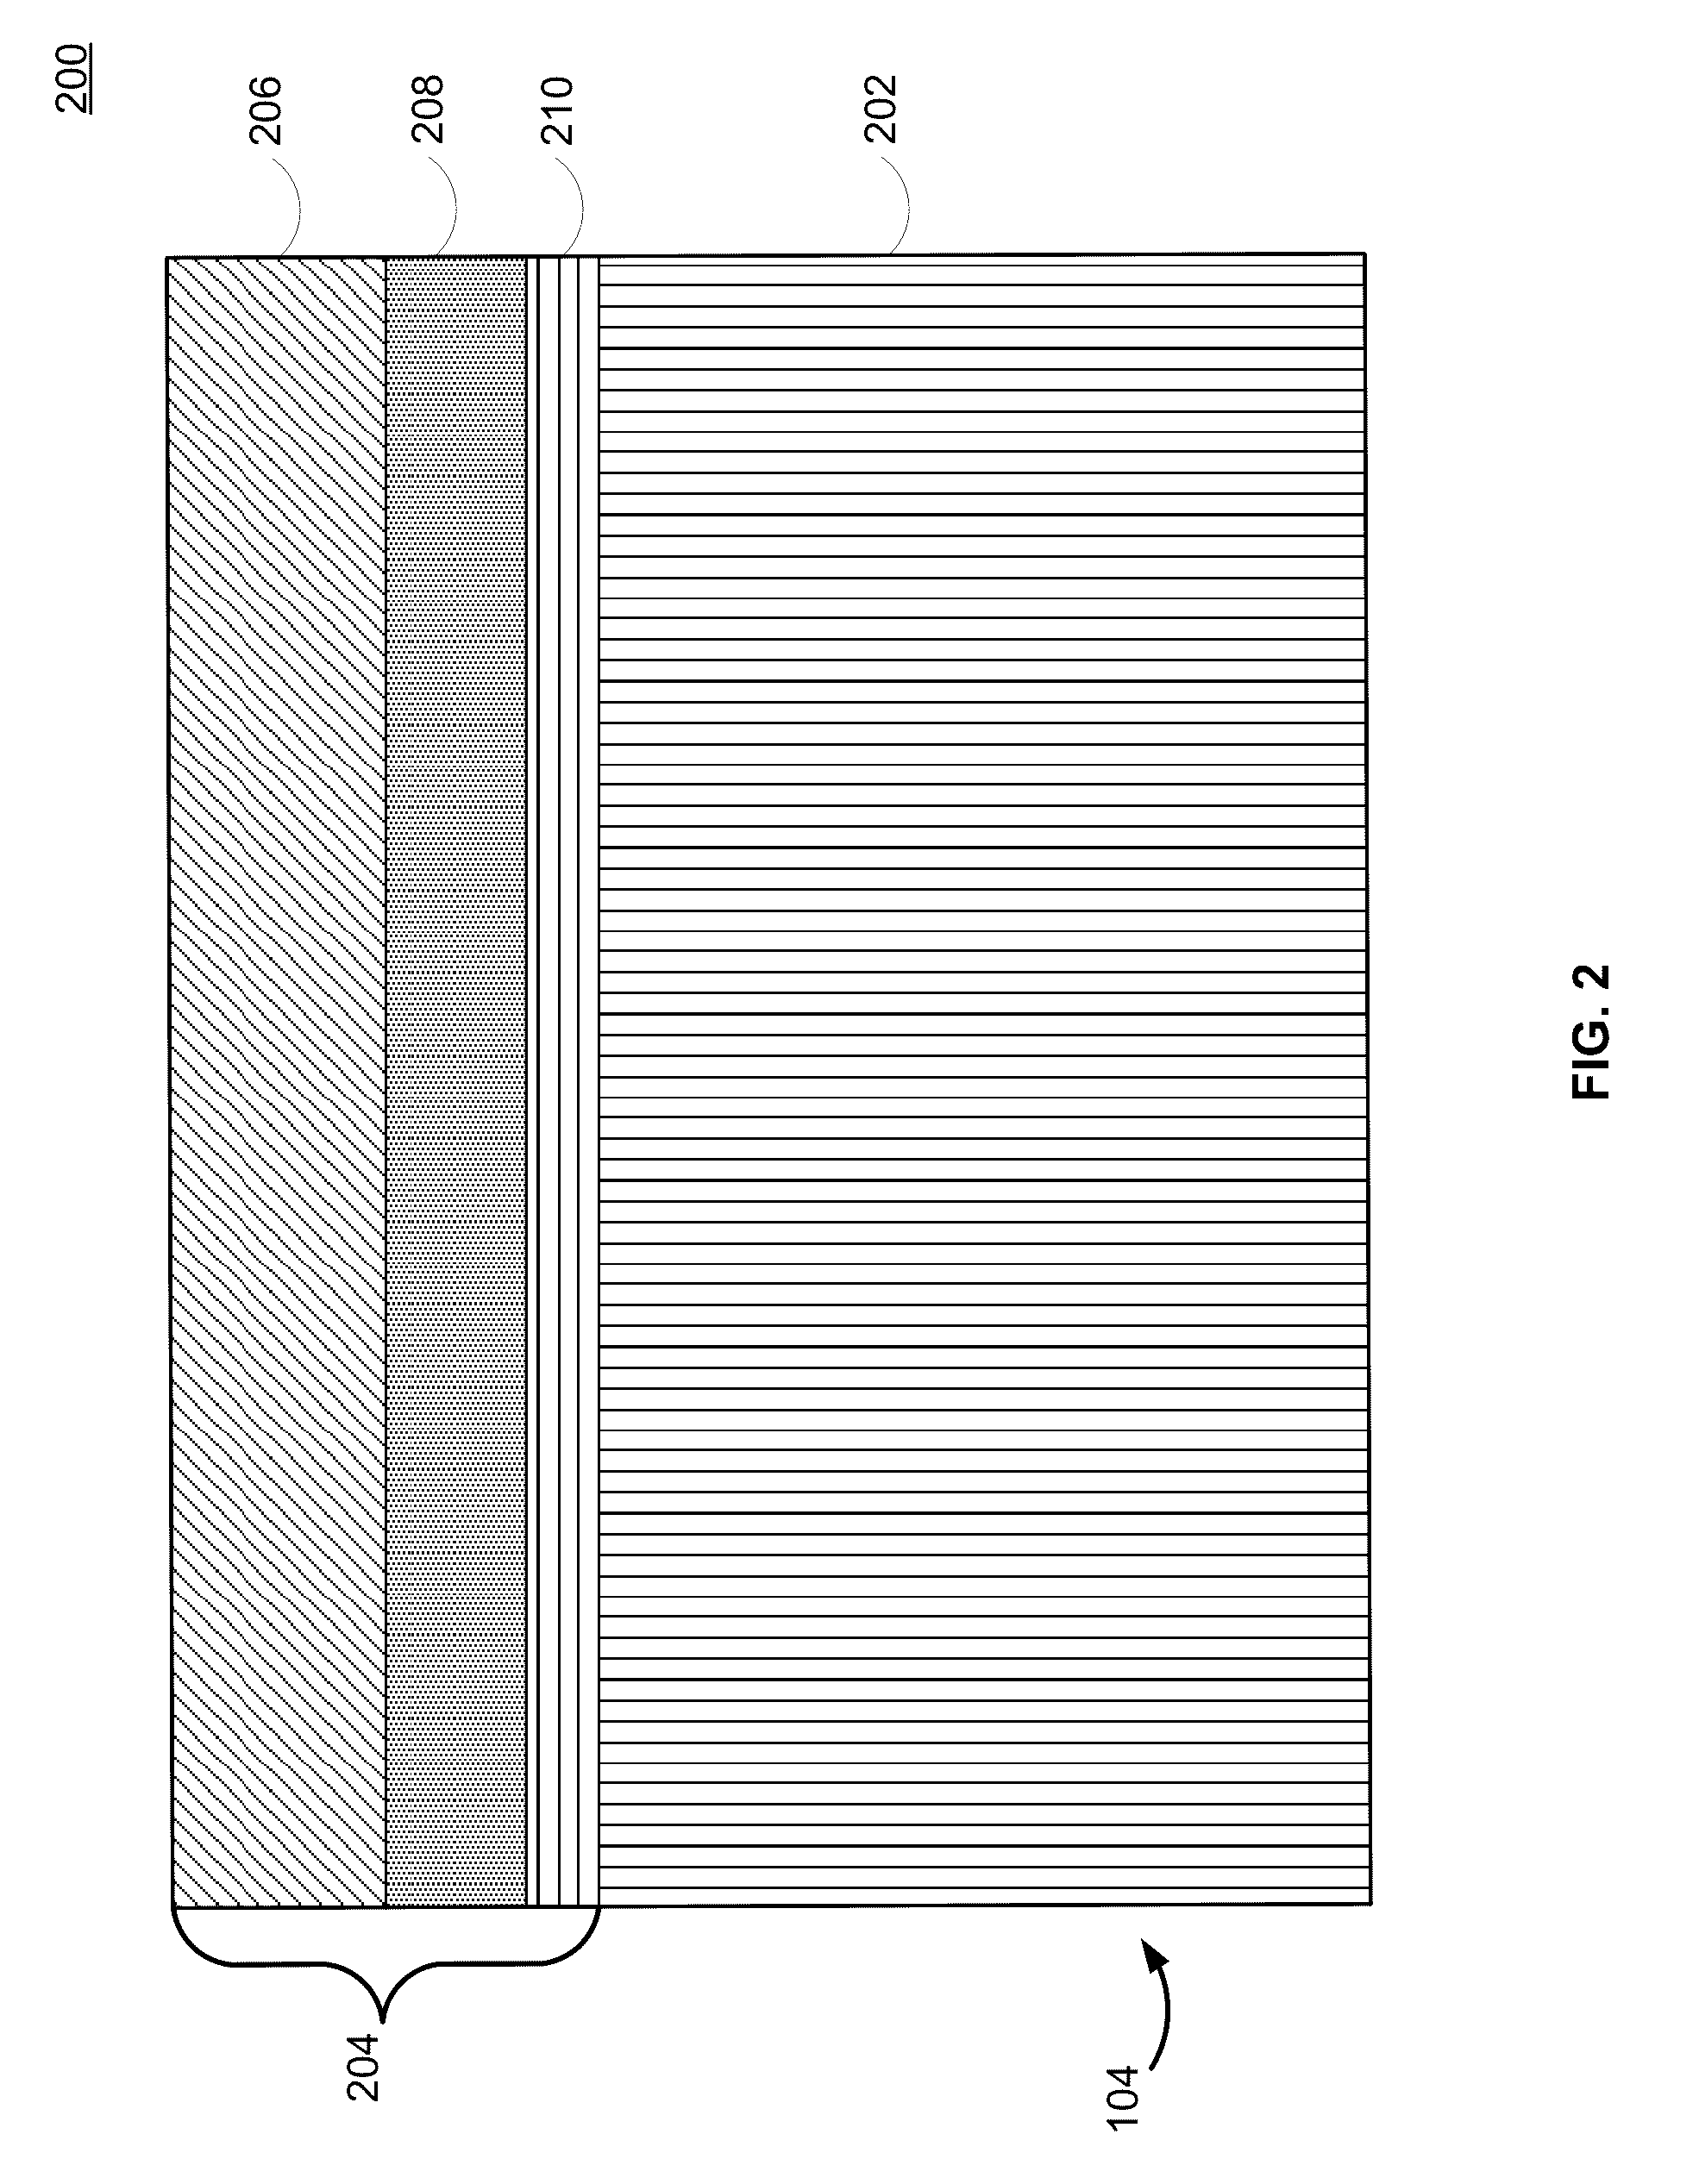 Lithium-ion electrochemical cell, components thereof, and methods of making and using same